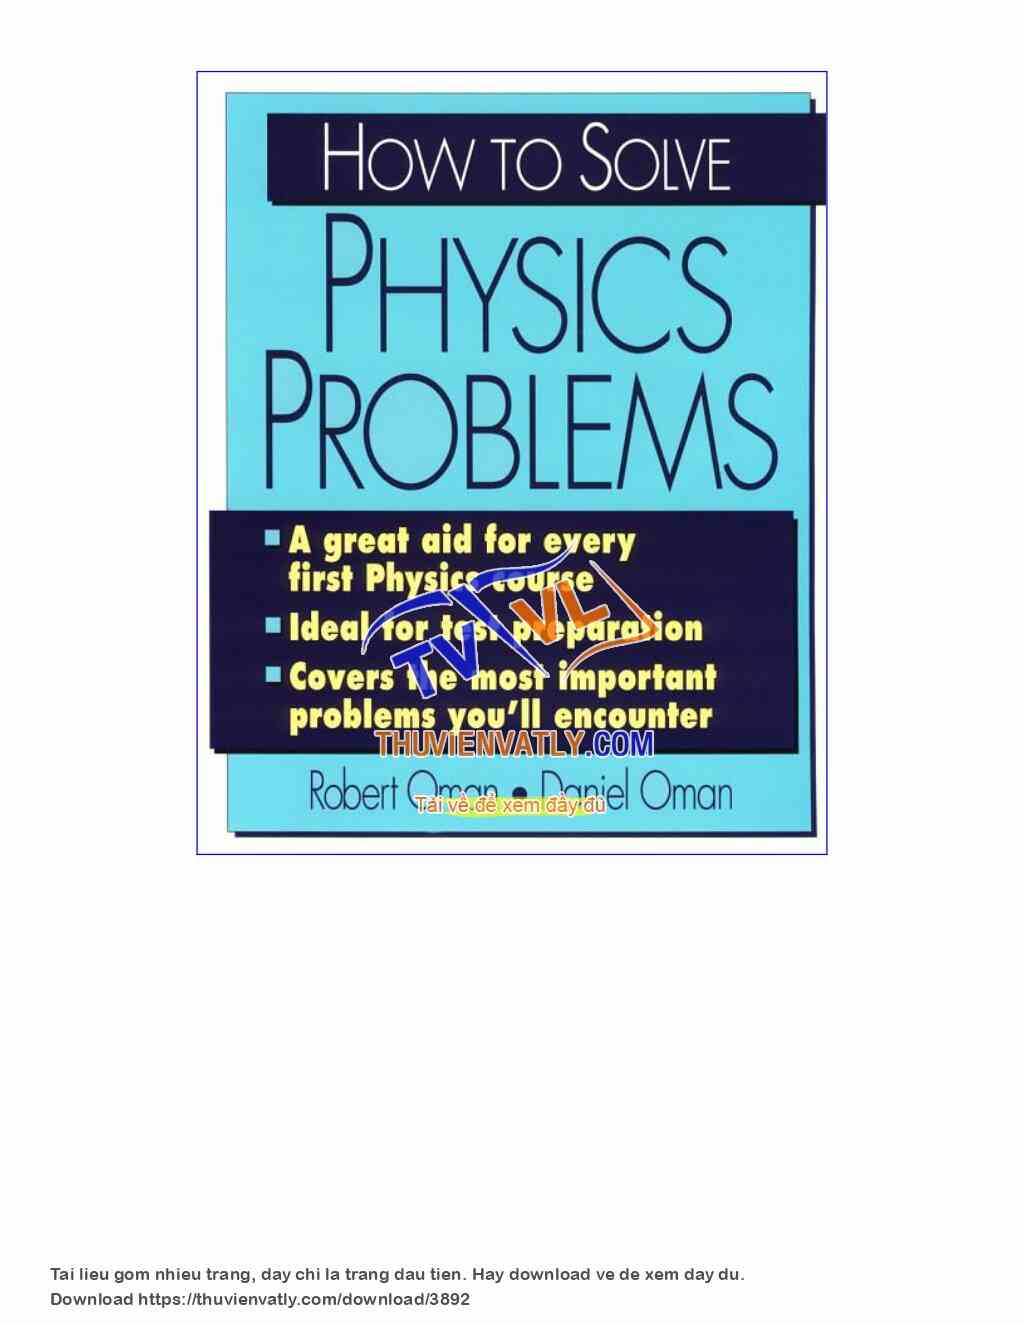 How to solve physics problem (McGraw-Hill)